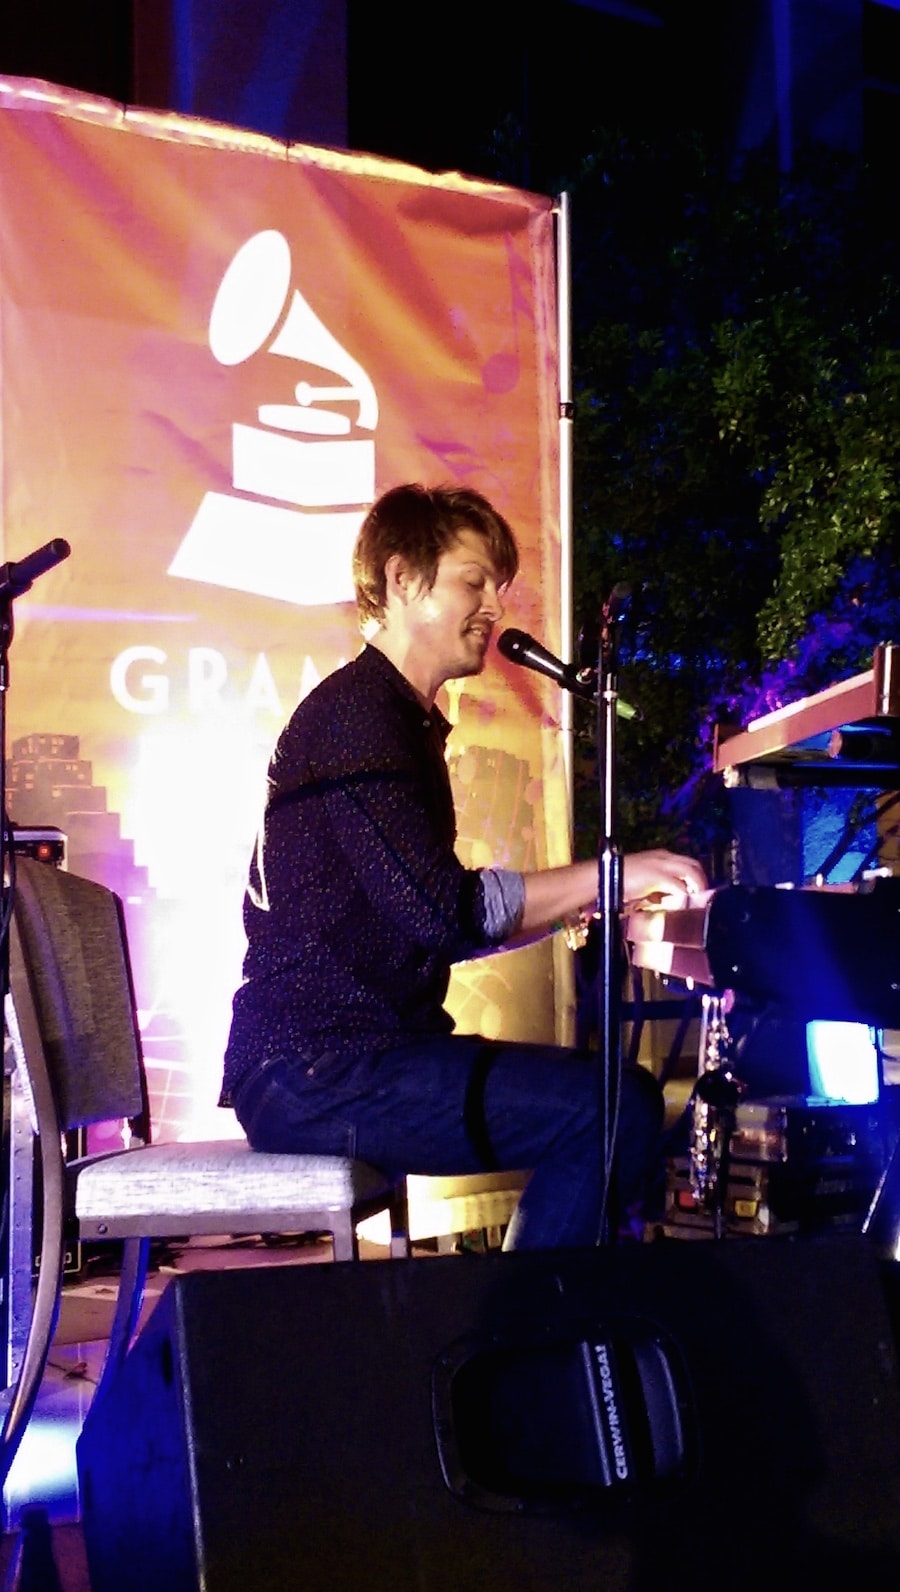 SXSW 2017: Taylor Hanson On Why Paying Tribute To Elders Matters